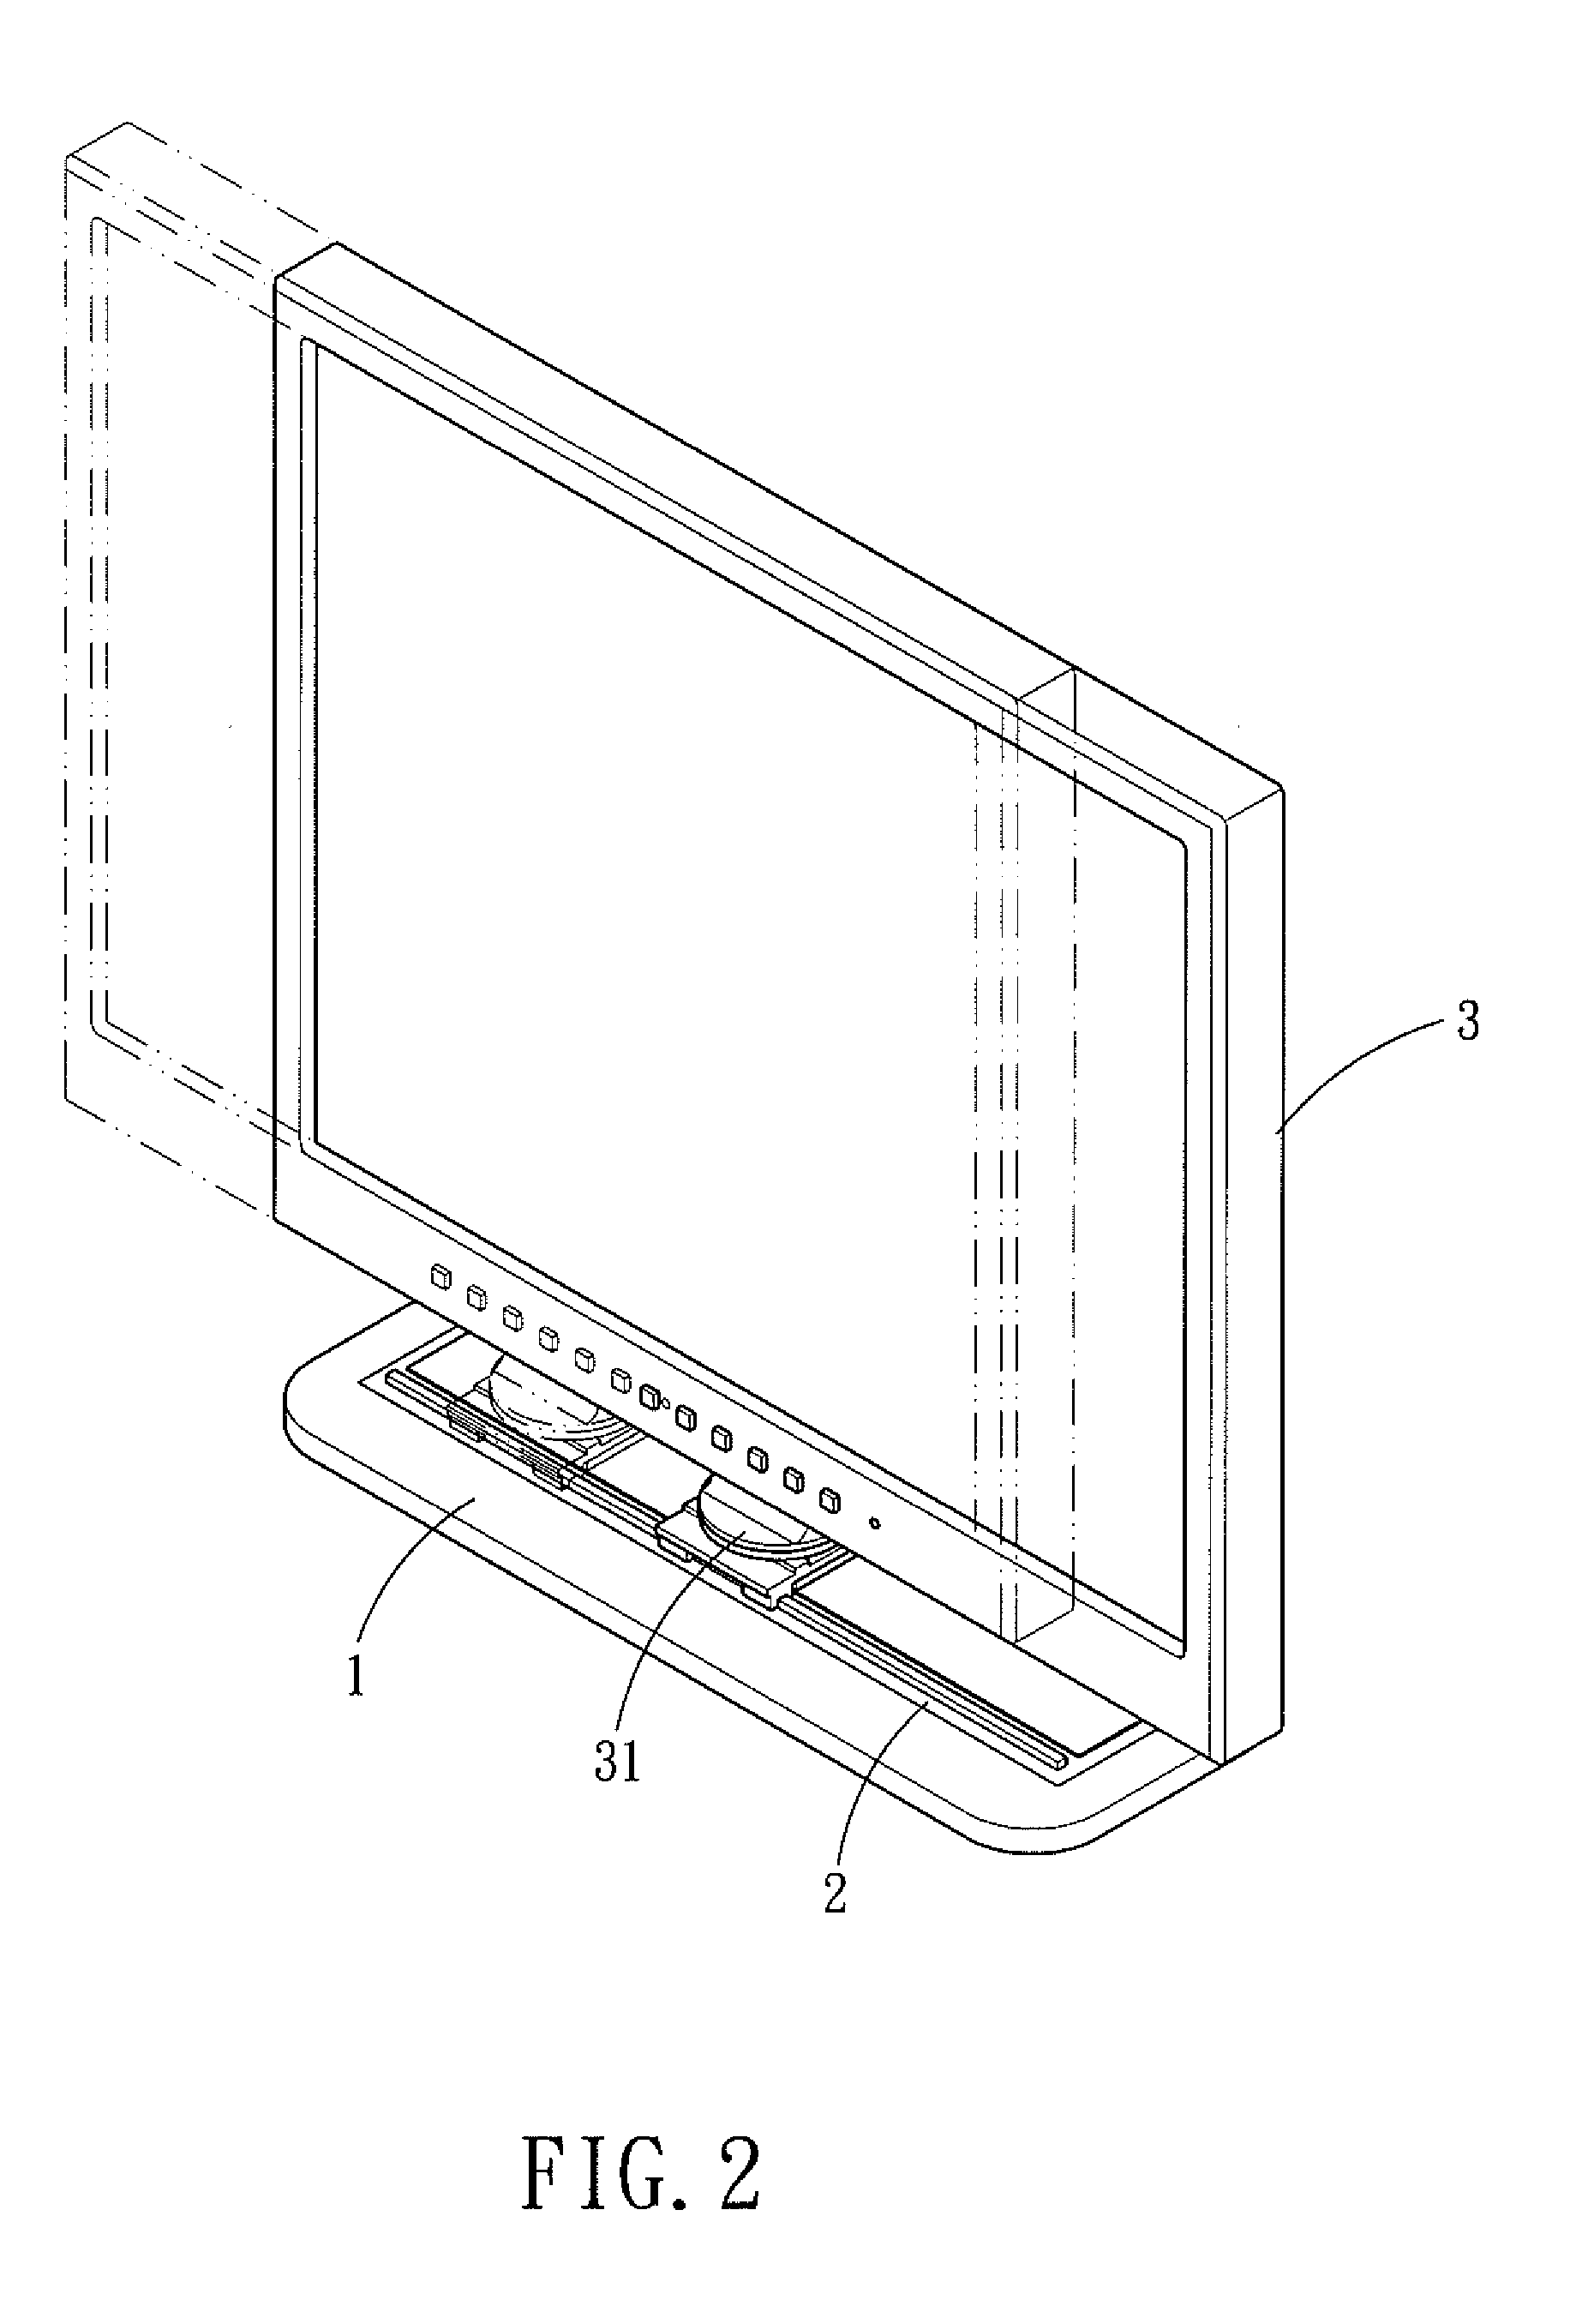 Display with a linear driving device